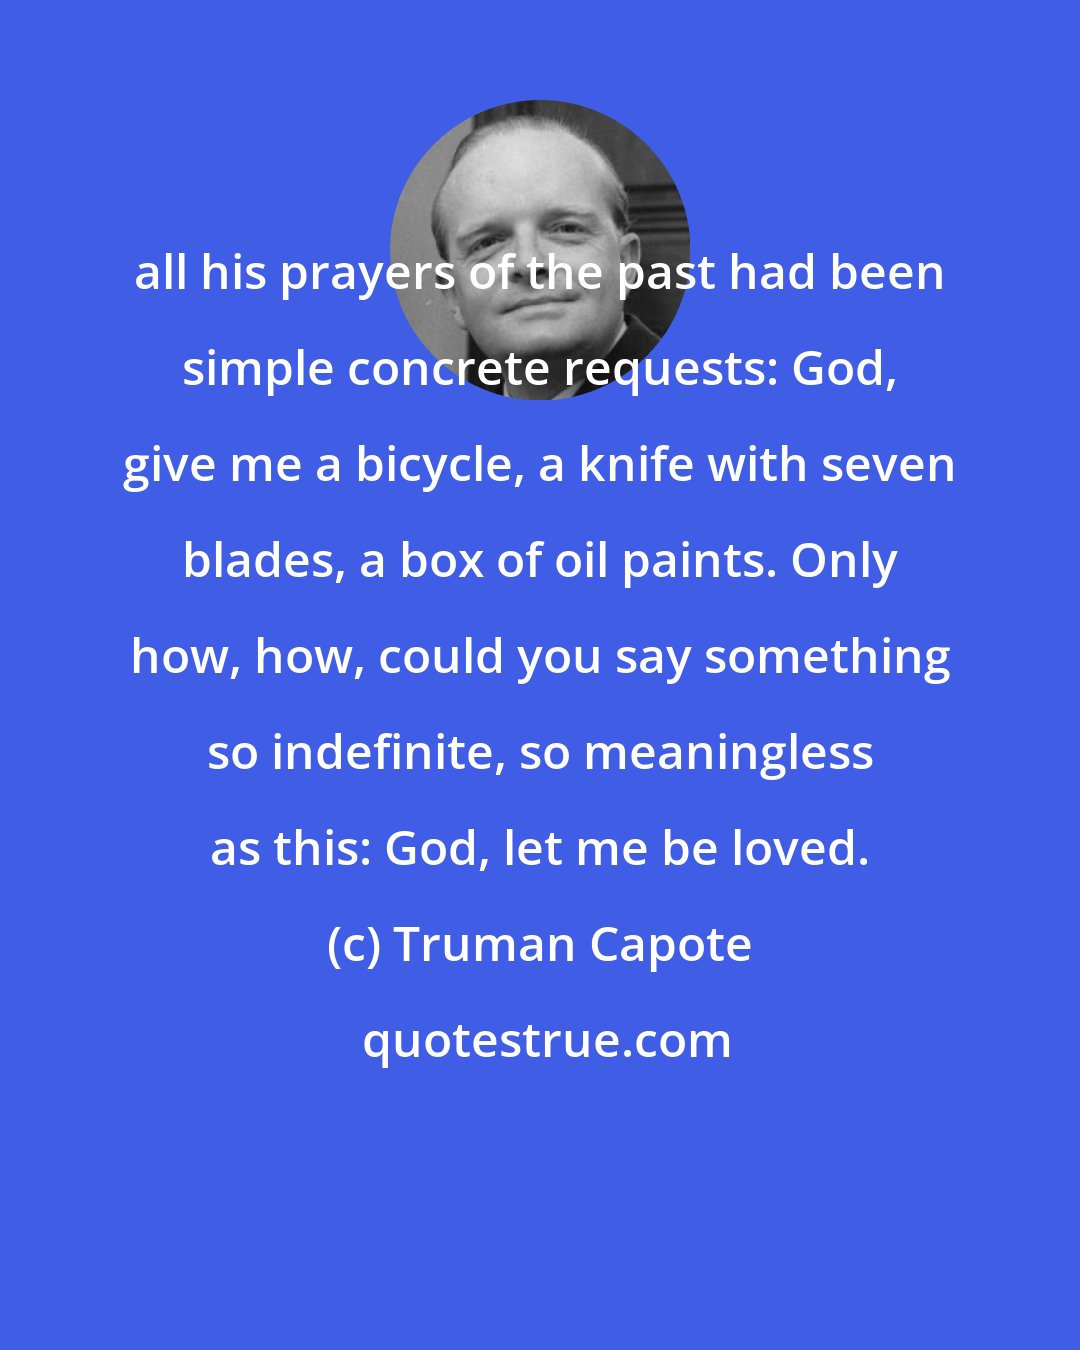 Truman Capote: all his prayers of the past had been simple concrete requests: God, give me a bicycle, a knife with seven blades, a box of oil paints. Only how, how, could you say something so indefinite, so meaningless as this: God, let me be loved.